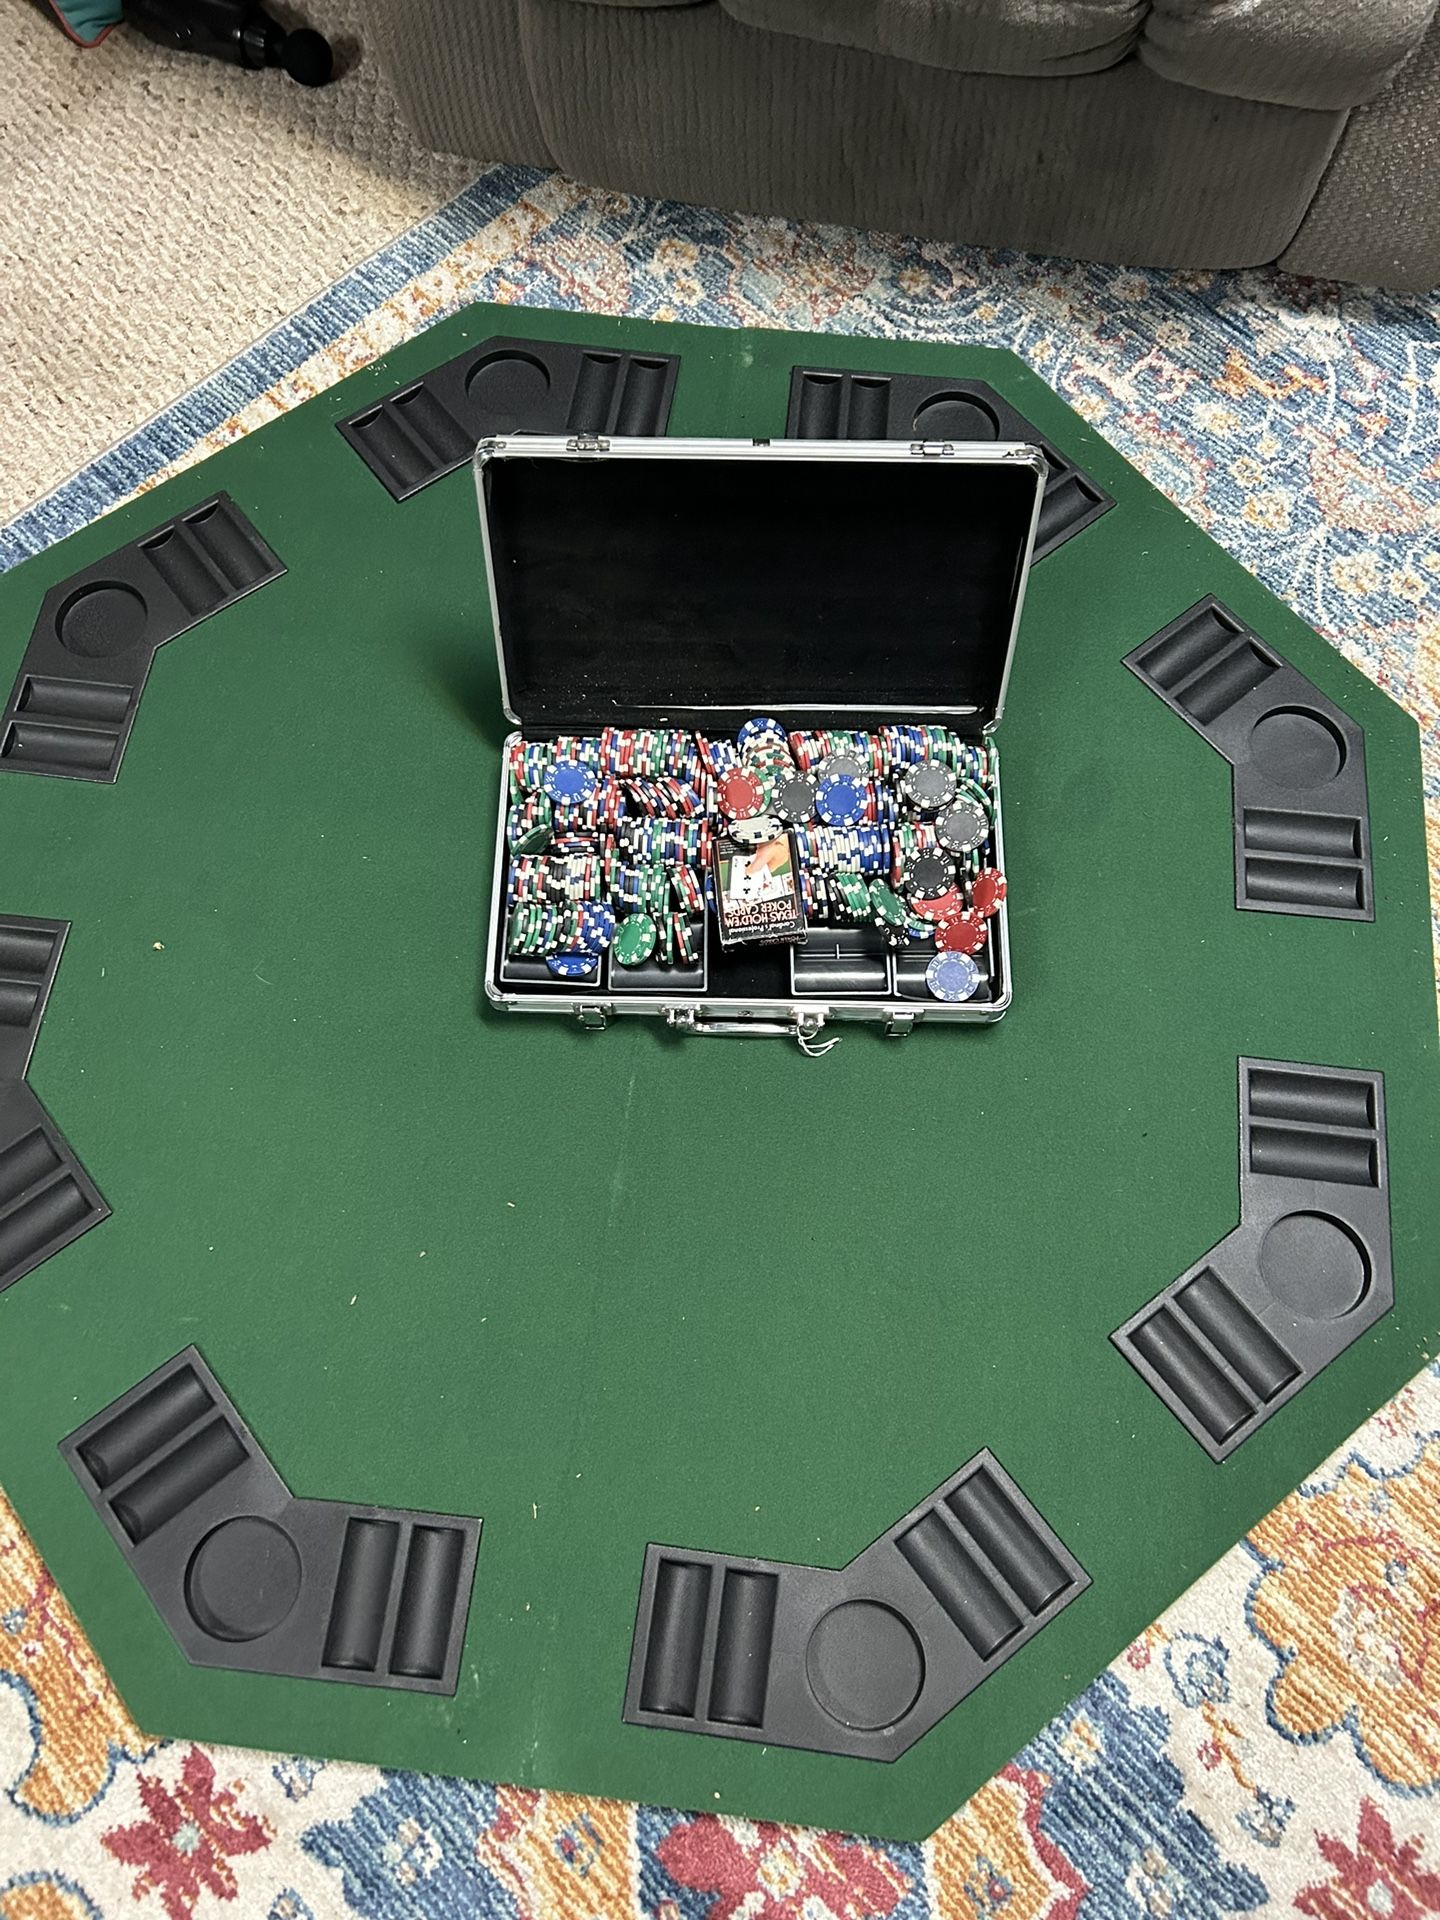 Portable Poker/Blackjack Game Table With Chips